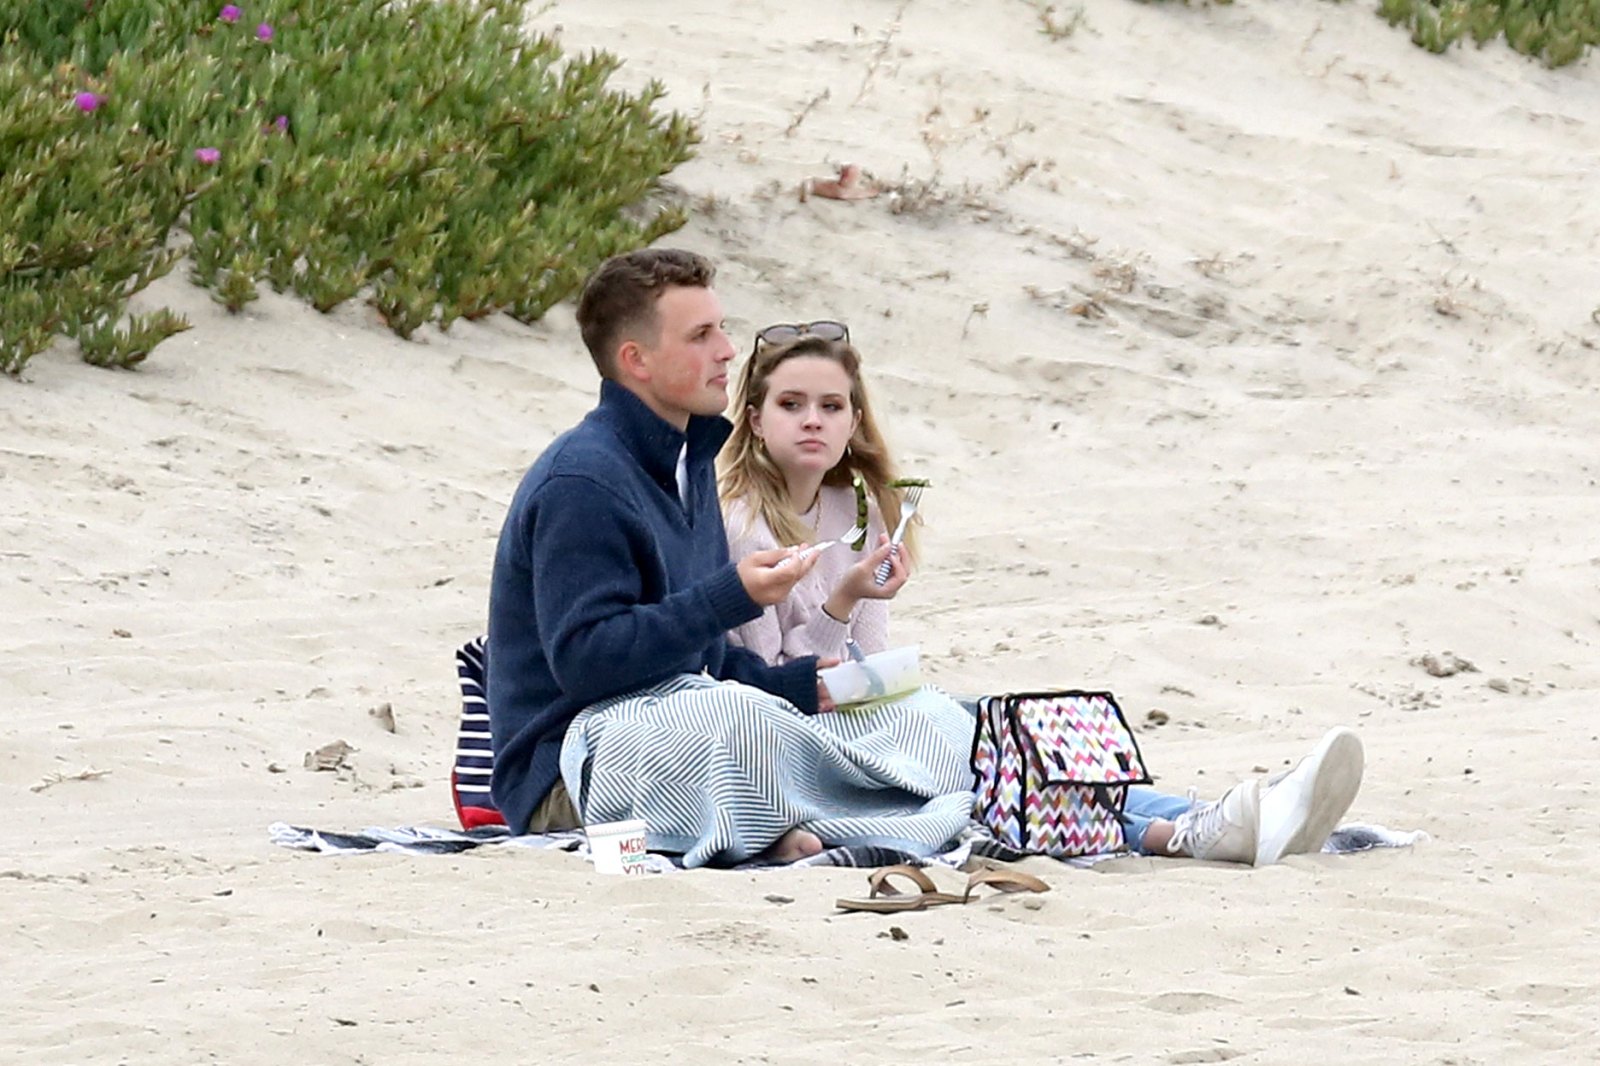 Reese Witherspoon’s Daughter Ava Phillippe, 19, Spotted Kissing New Man on Beach